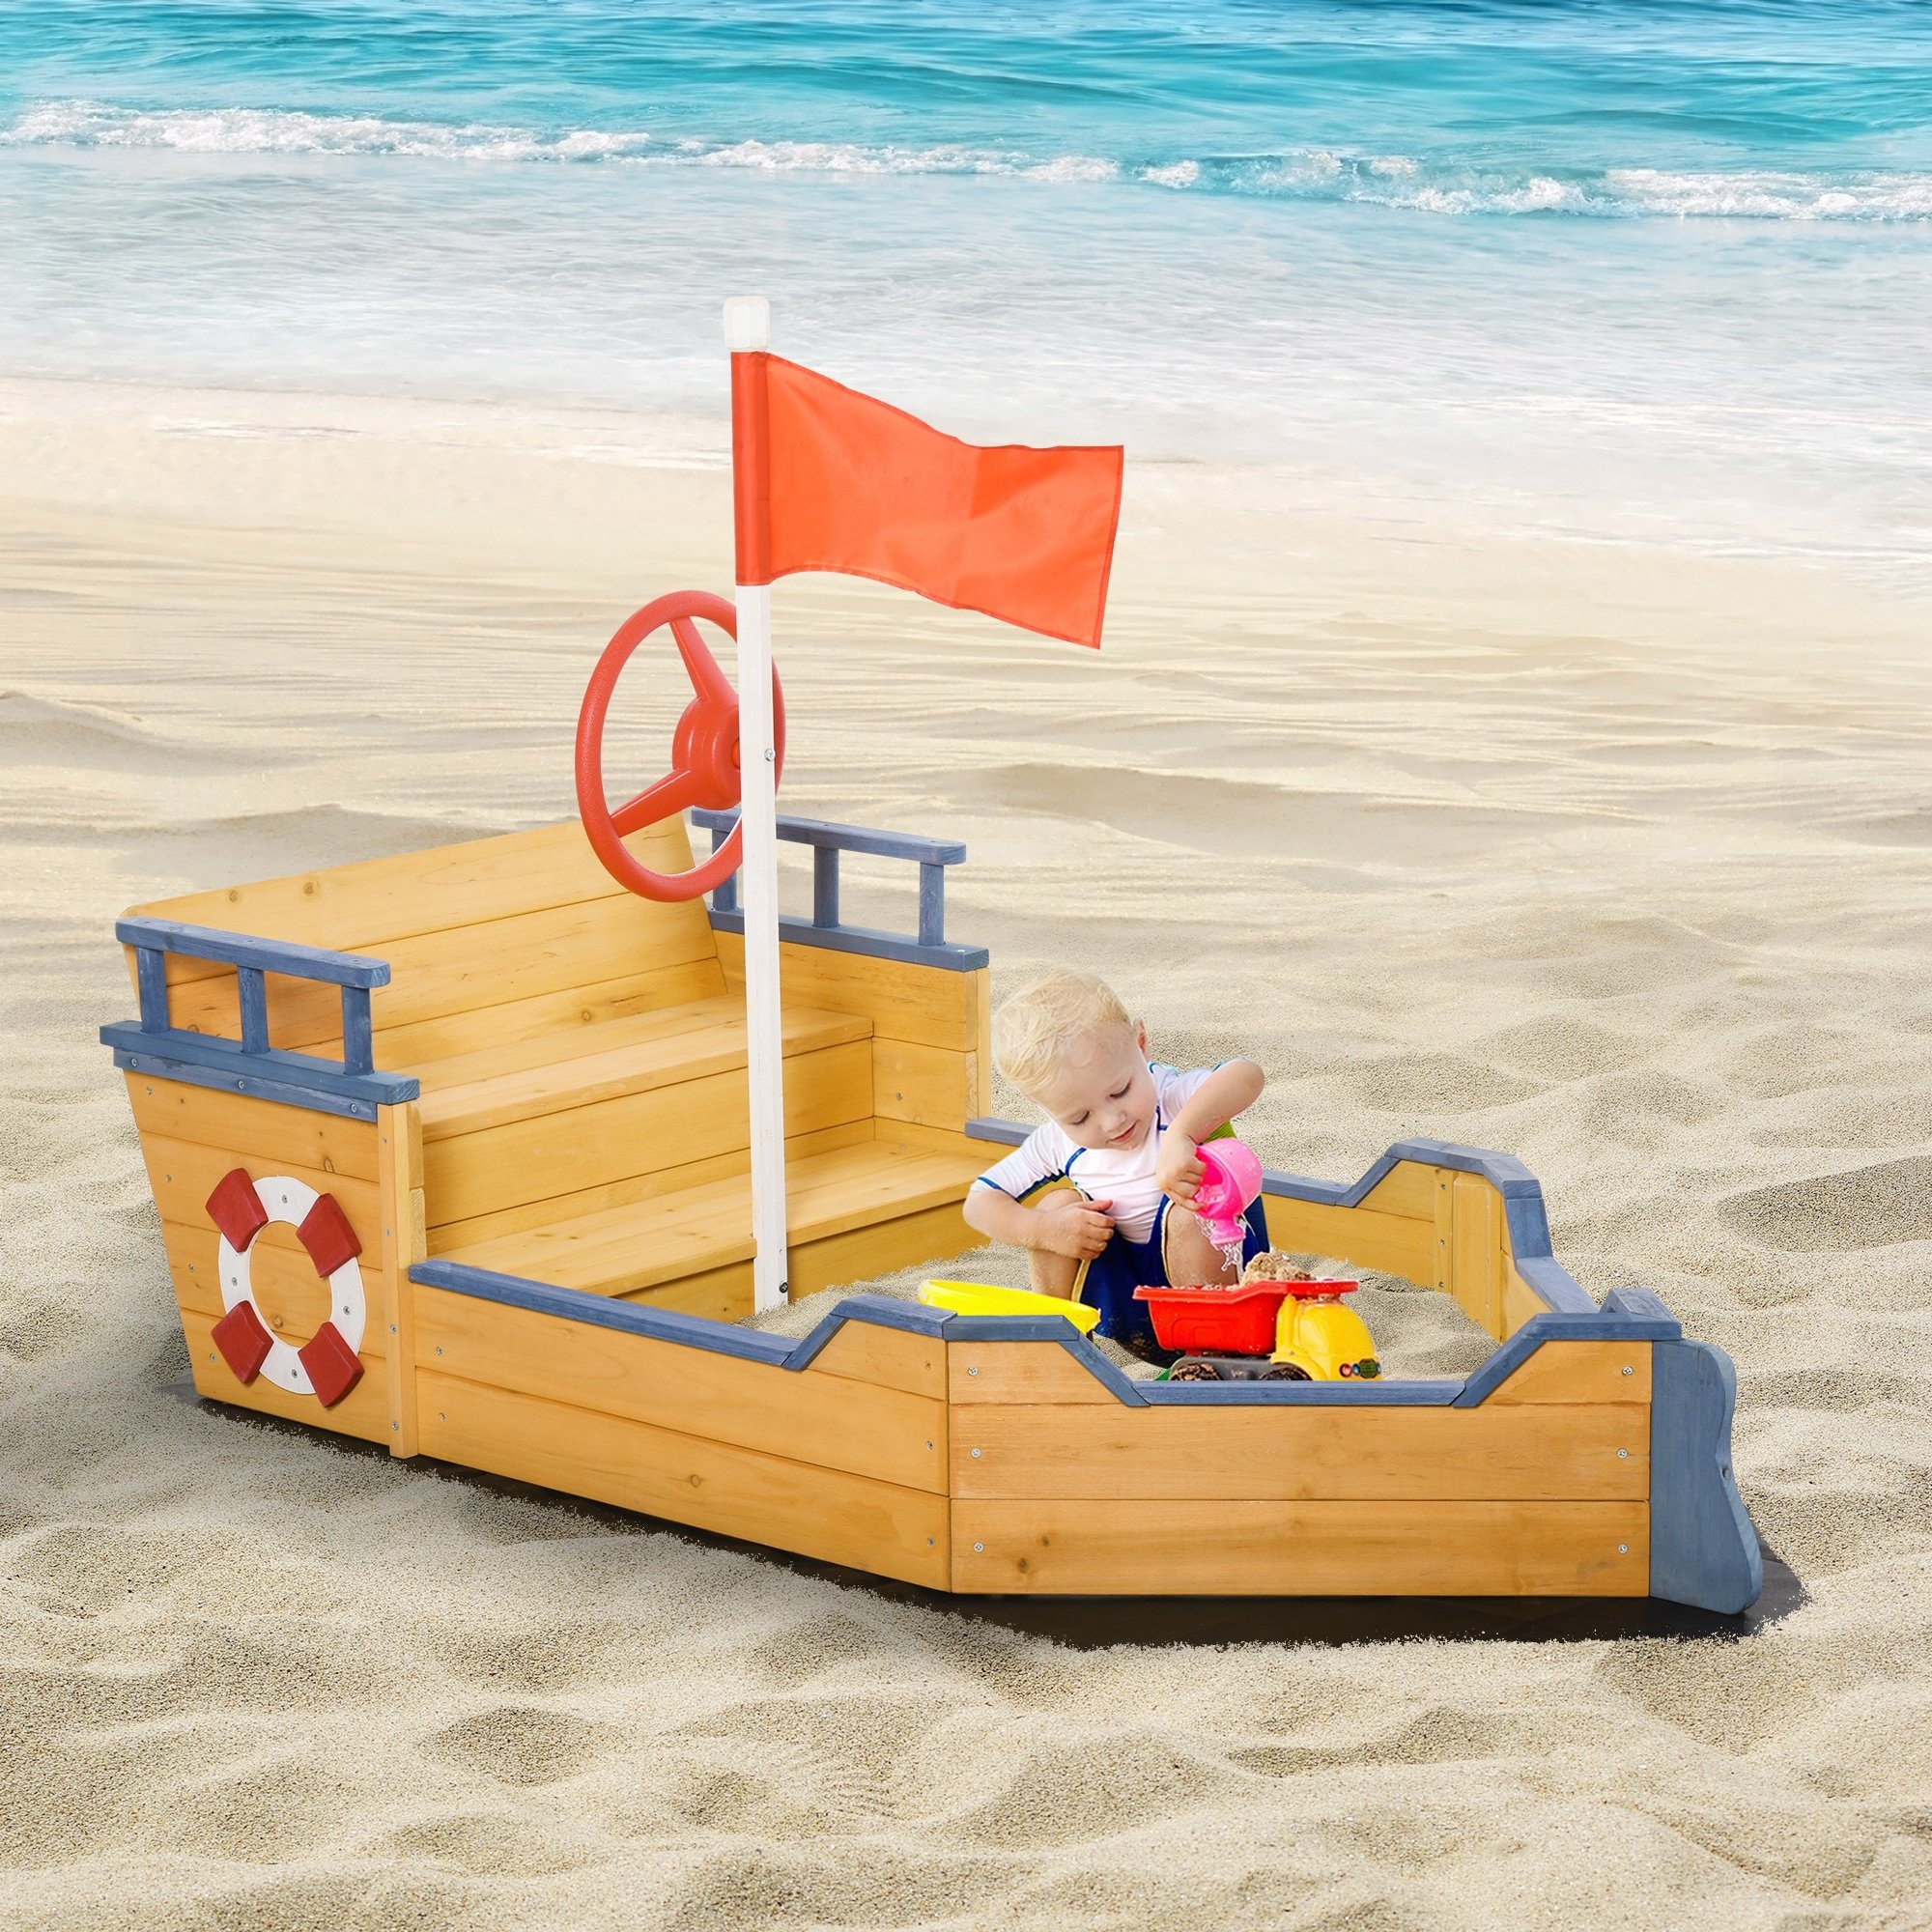 Outsunny Kids Sandbox Pirate Ship Play Boat w/ Bench Seat and Storage Cedar Wood 